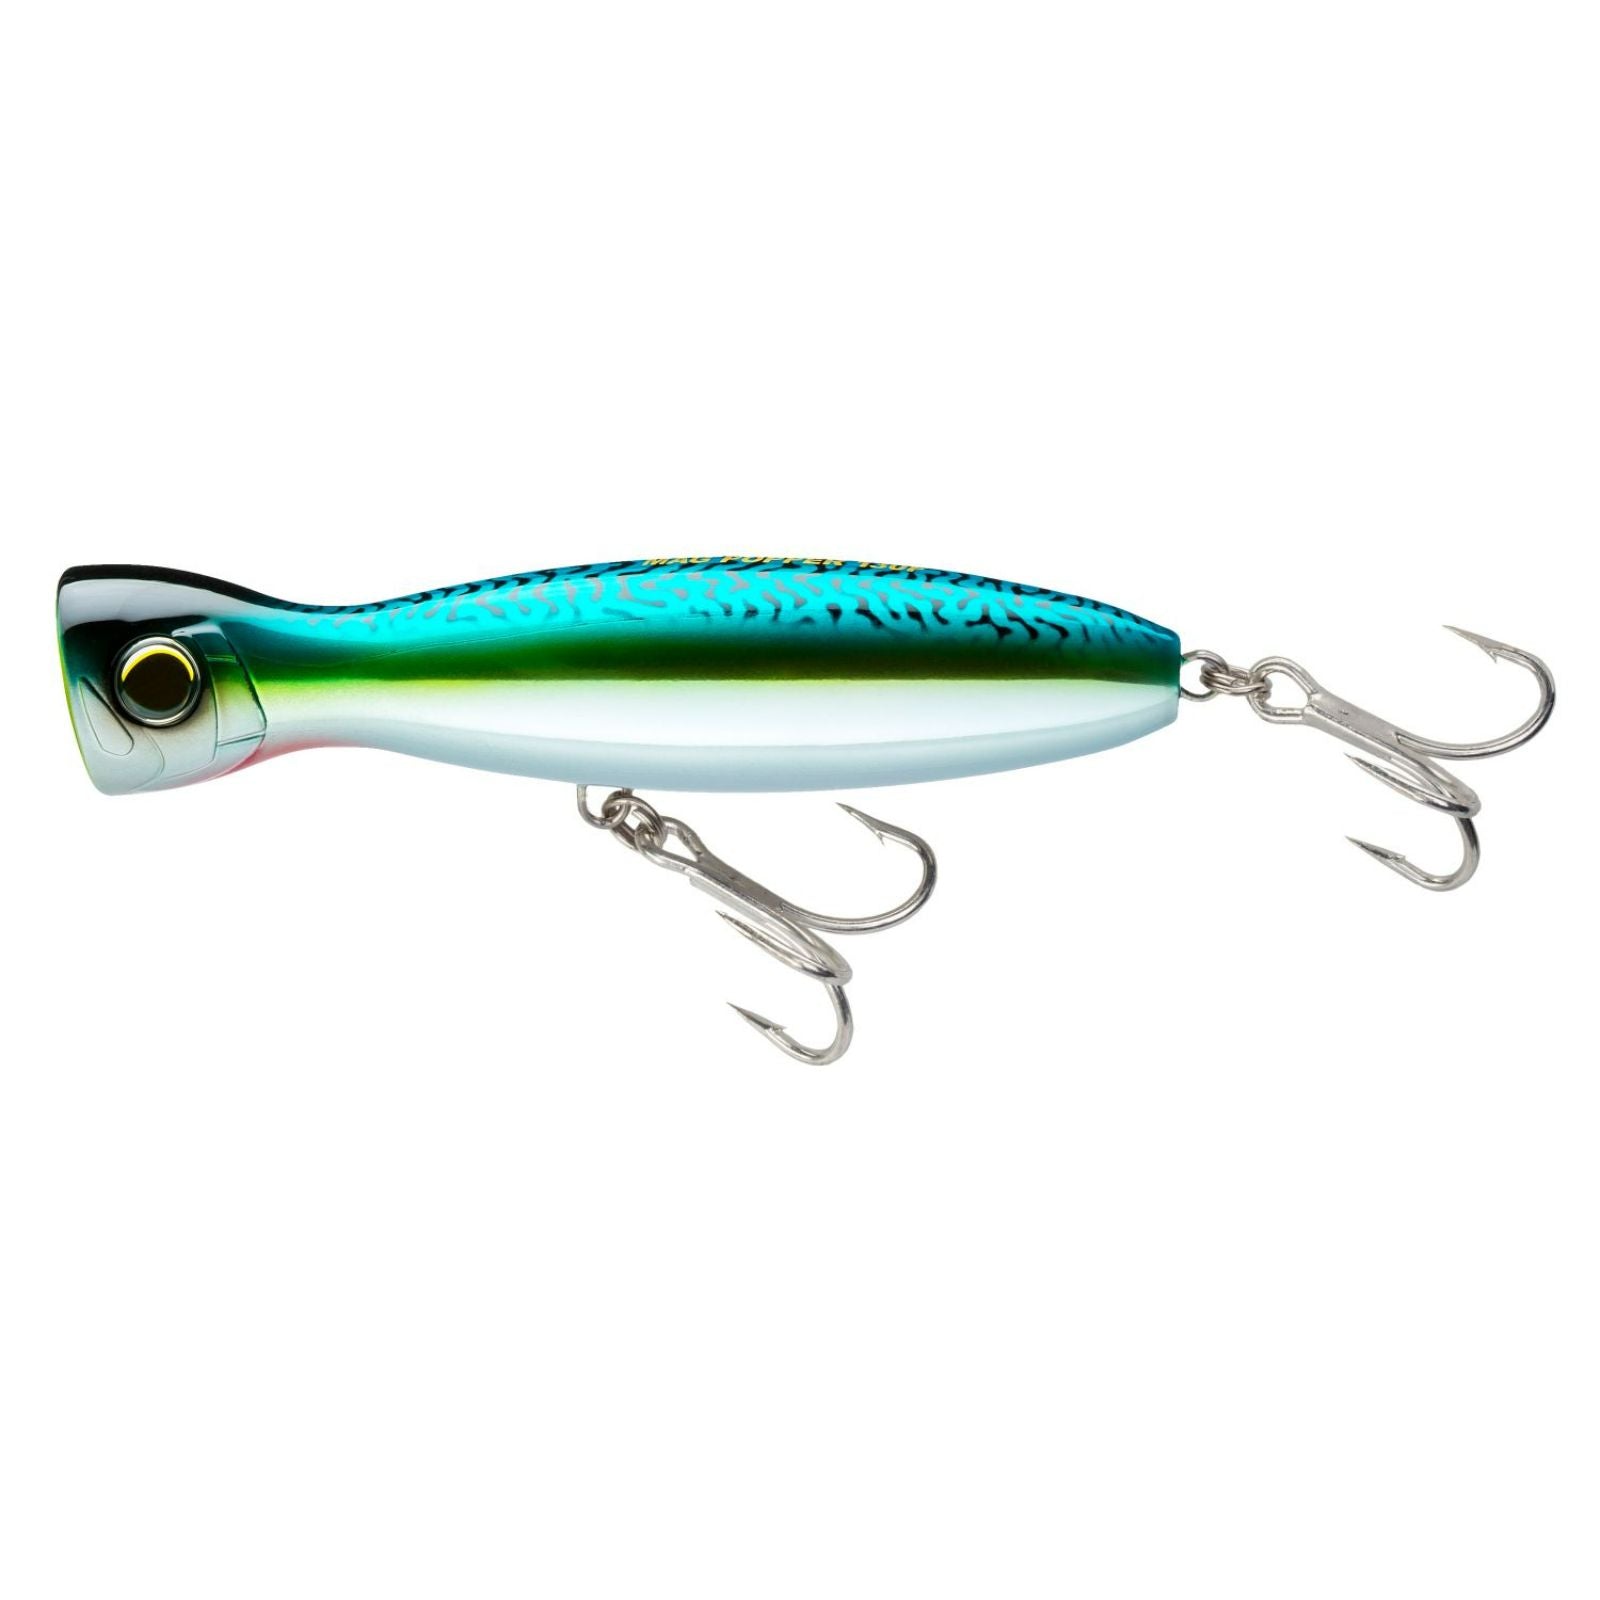 Chartreuse White Gold Blade 0.25 Oz Hex-Shaped Zman Chatterbait from Fish  On Outlet